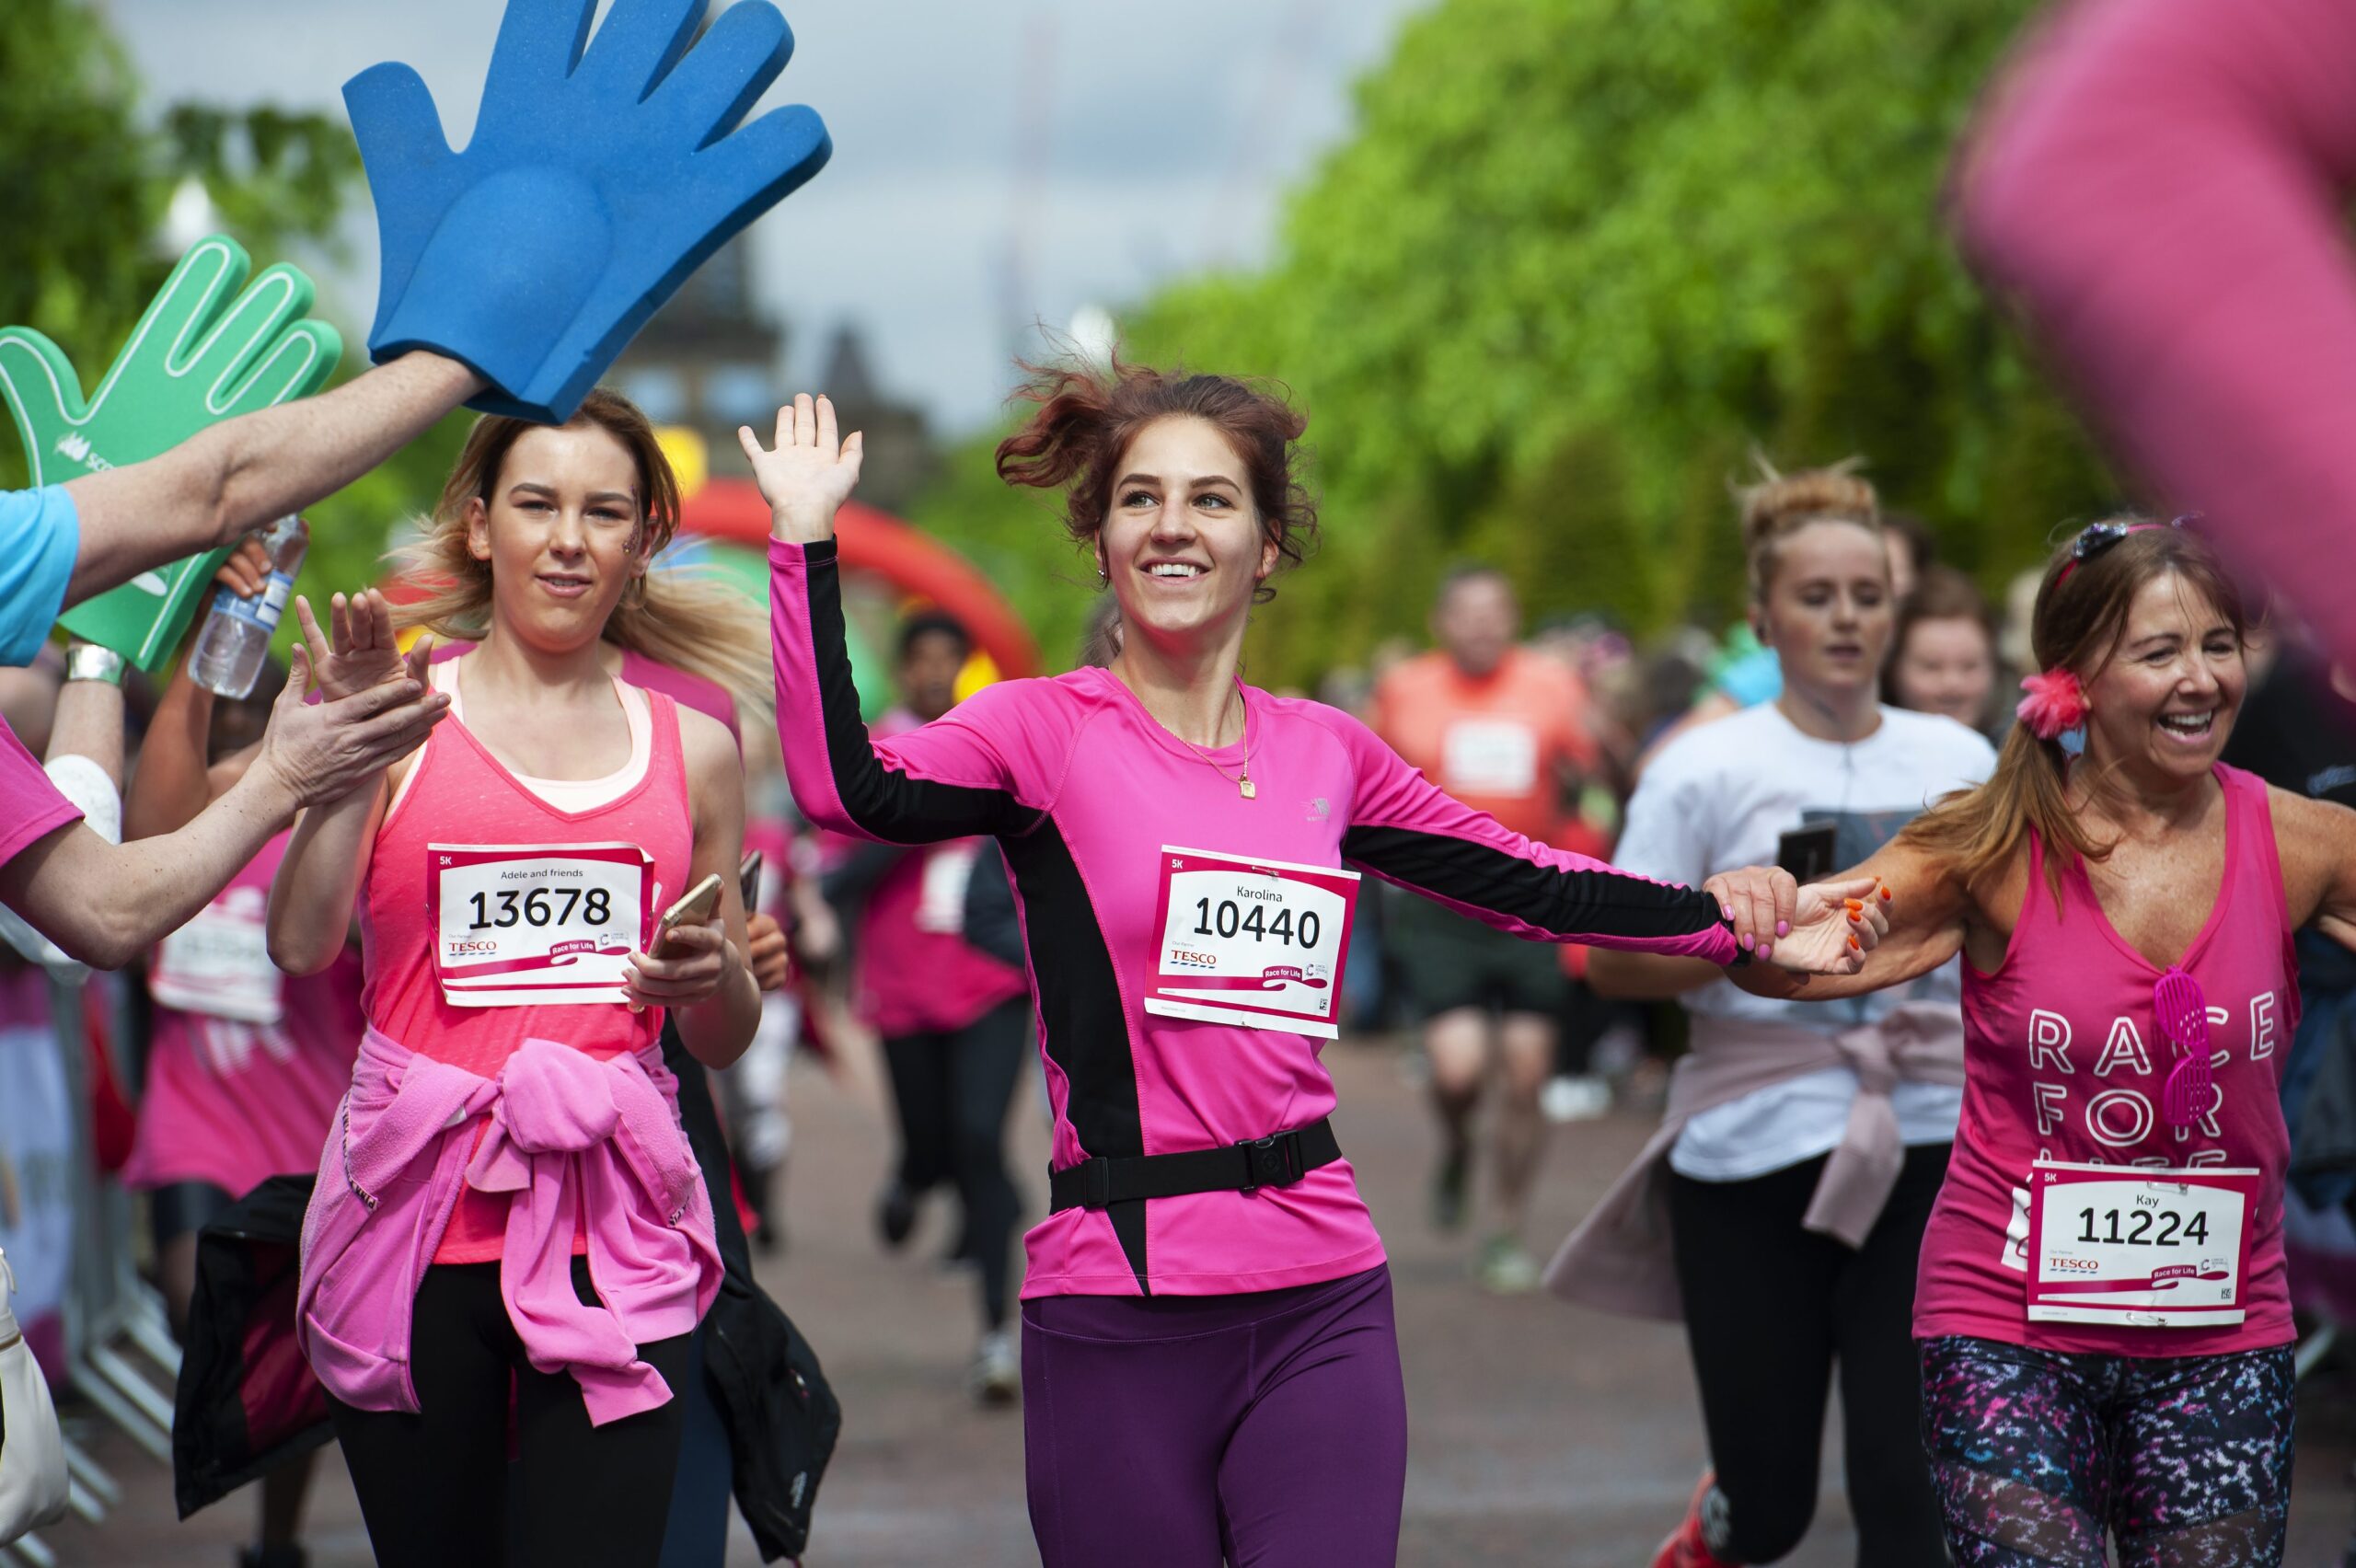 Finishers at Cancer Research UK Race for Life Glasgow scaled